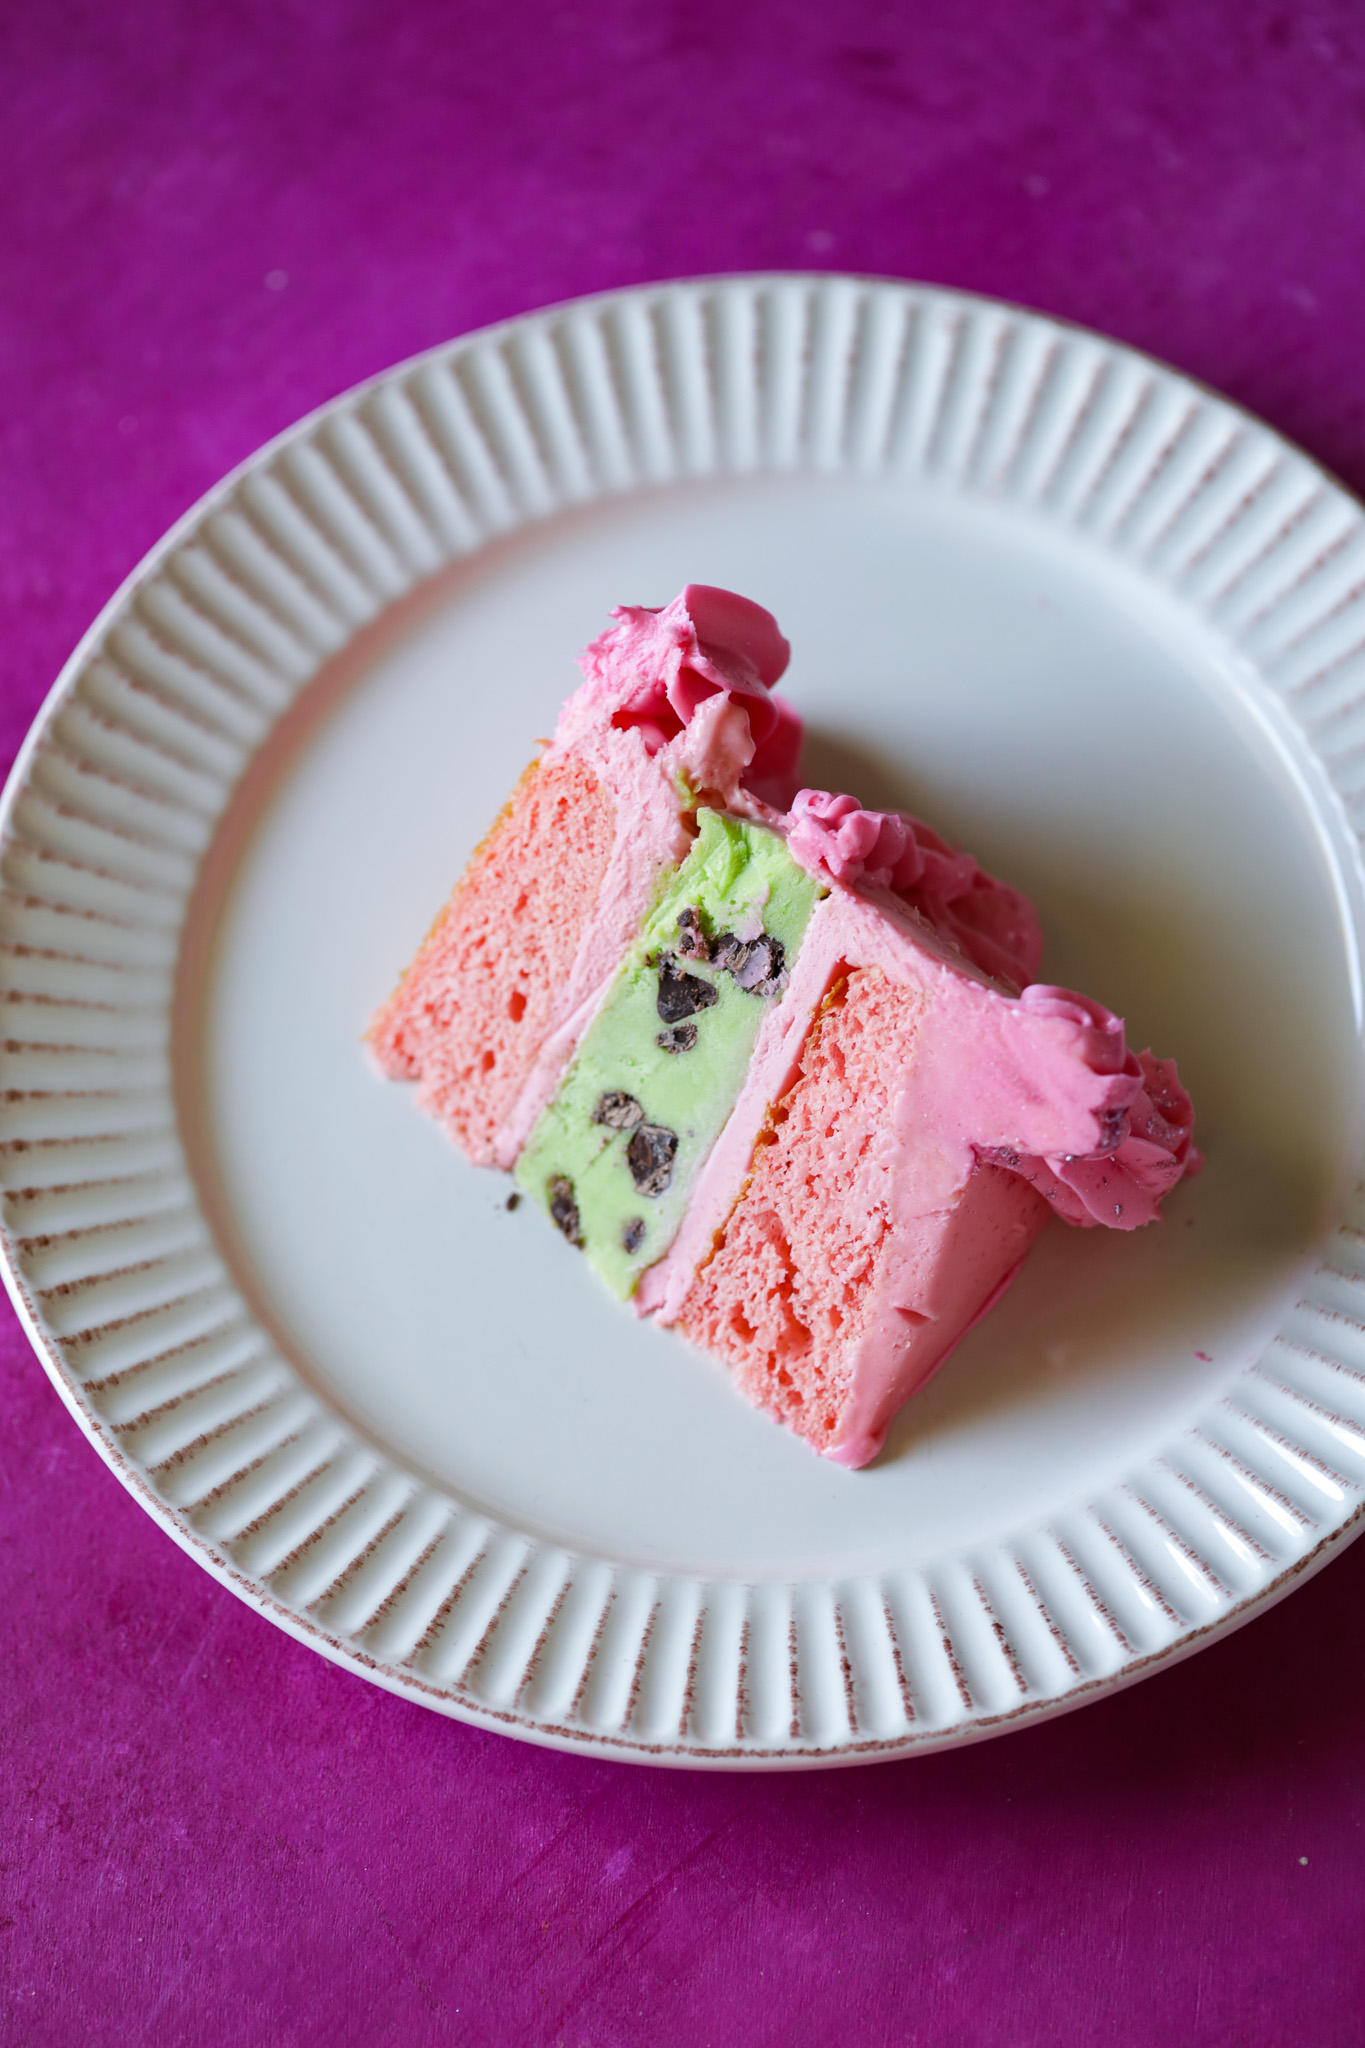 Craving a show-stopping dessert? Try this easy Vegan Strawberry Mint Chip Ice Cream Cake! Layers of creamy avocado mint chip ice cream and fluffy strawberry cake, all wrapped in luscious strawberry frosting. Perfect for parties and special occasions, plus it's freezer-friendly! #VeganDesserts #IceCreamCake #PartyRecipes #VeganCake #SummerDesserts